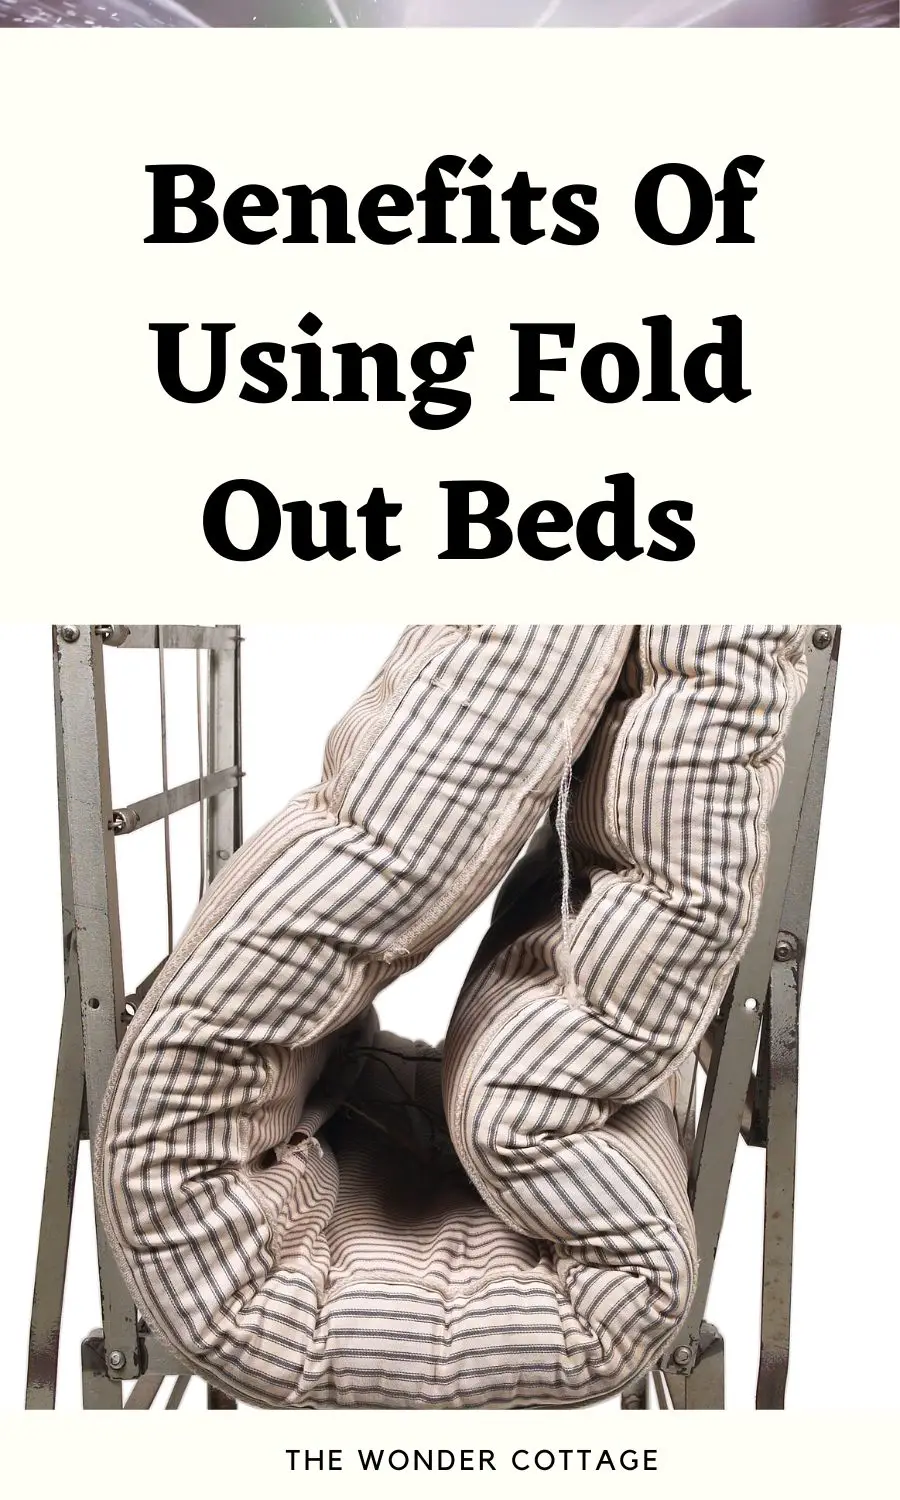 Advantages Of Using Fold Out Beds